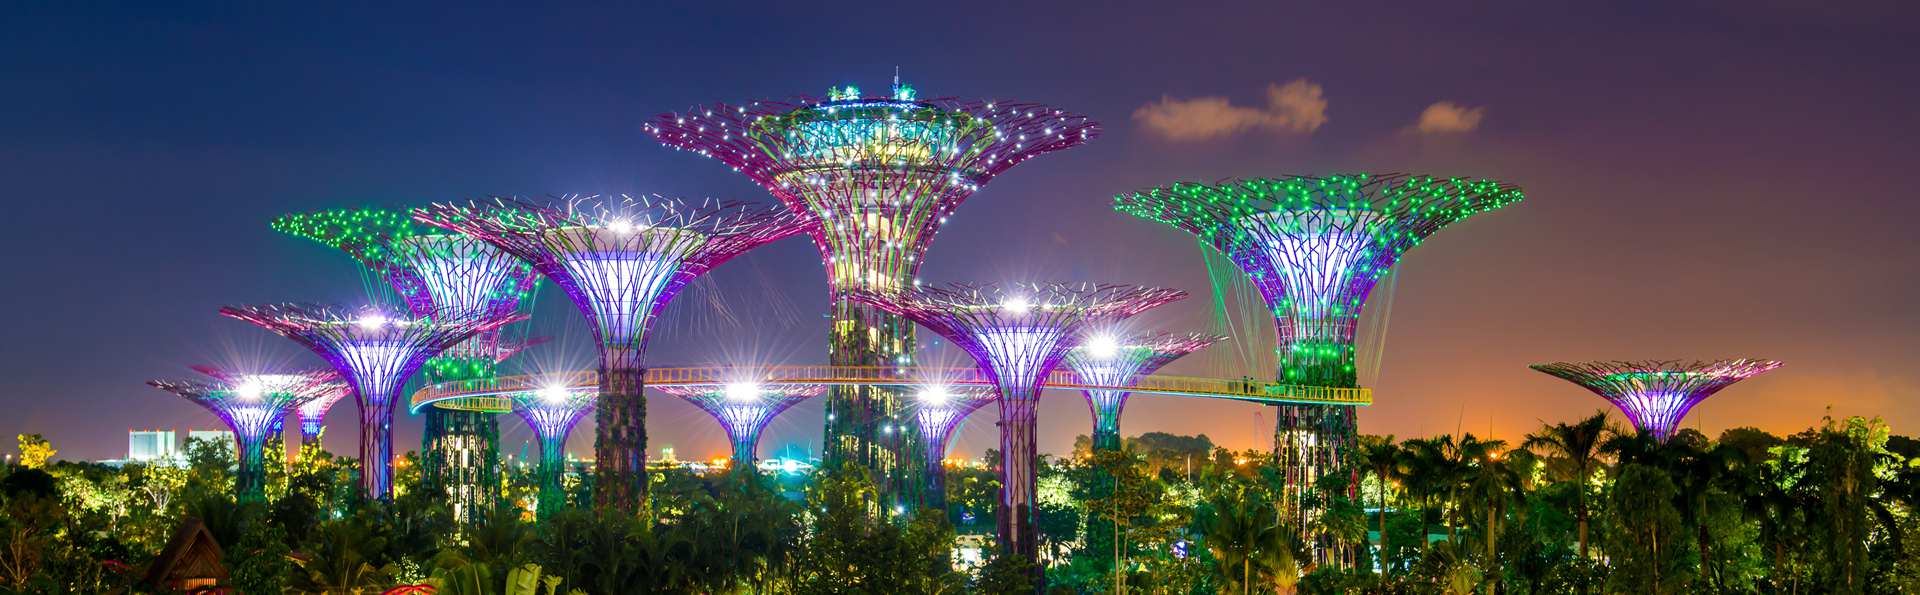 Gardens by the Bay | Singapore Visitors Guide | Marina Bay Sands